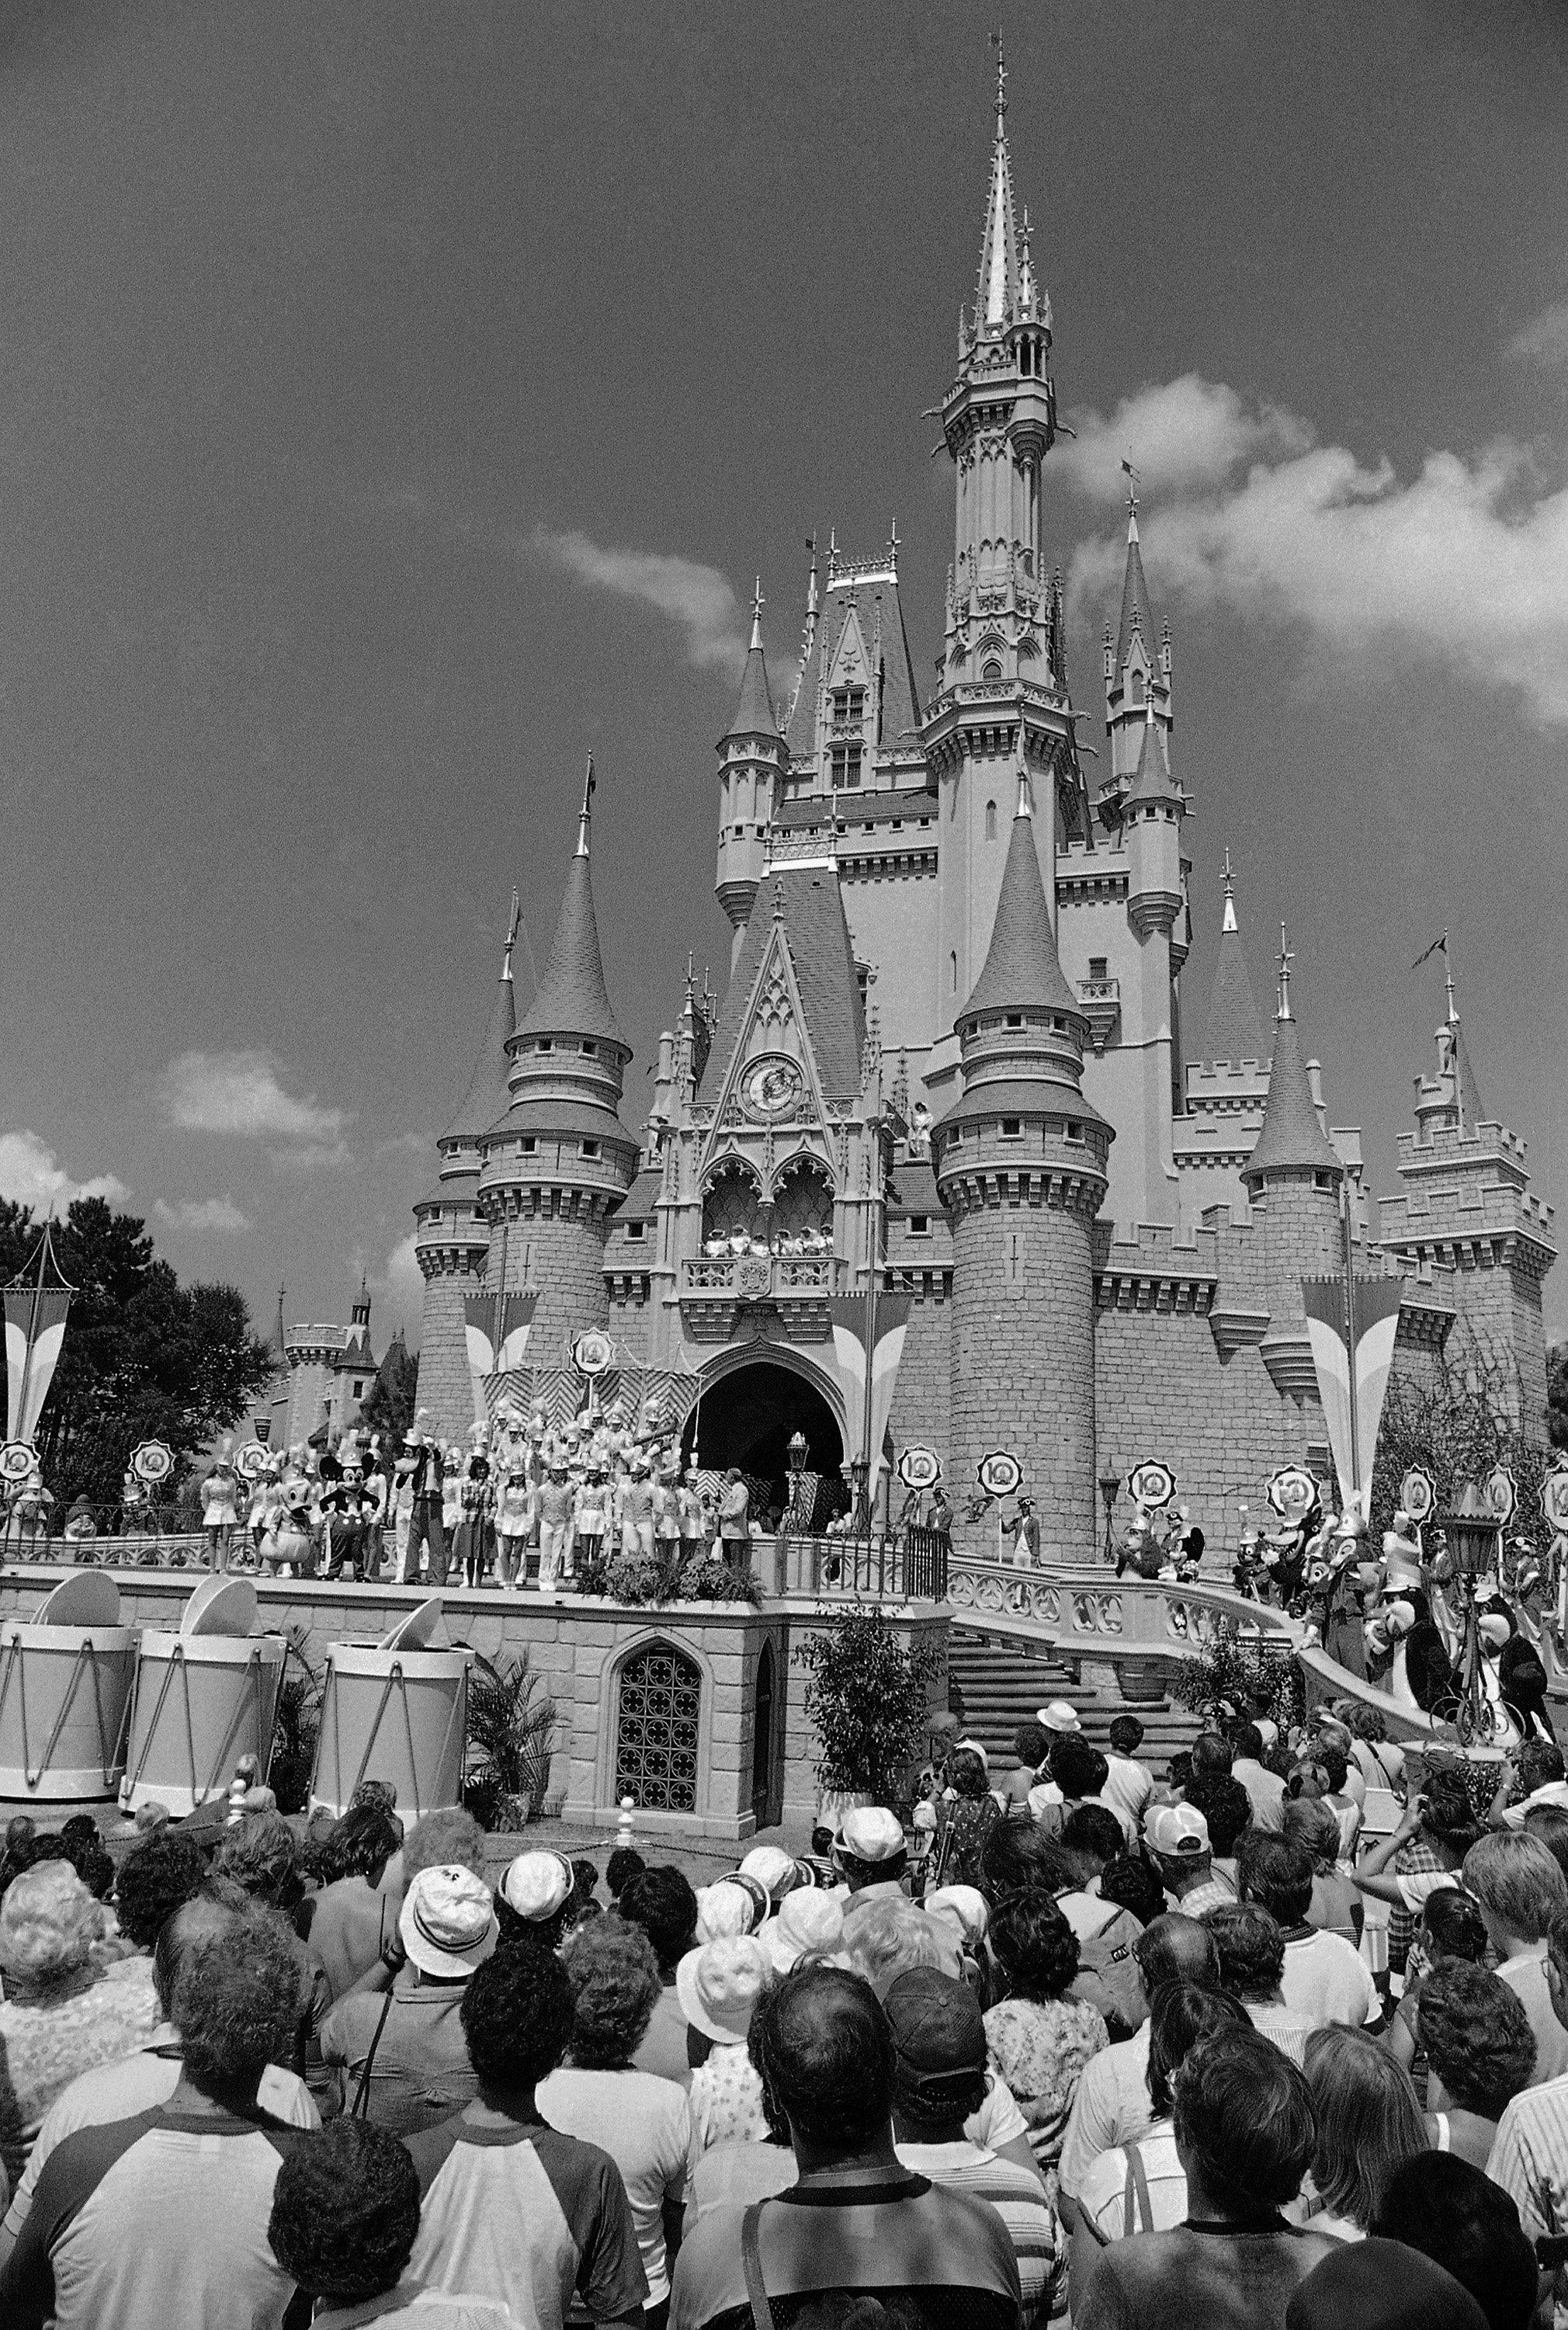 What's the difference between Disneyland and Disney World theme parks?